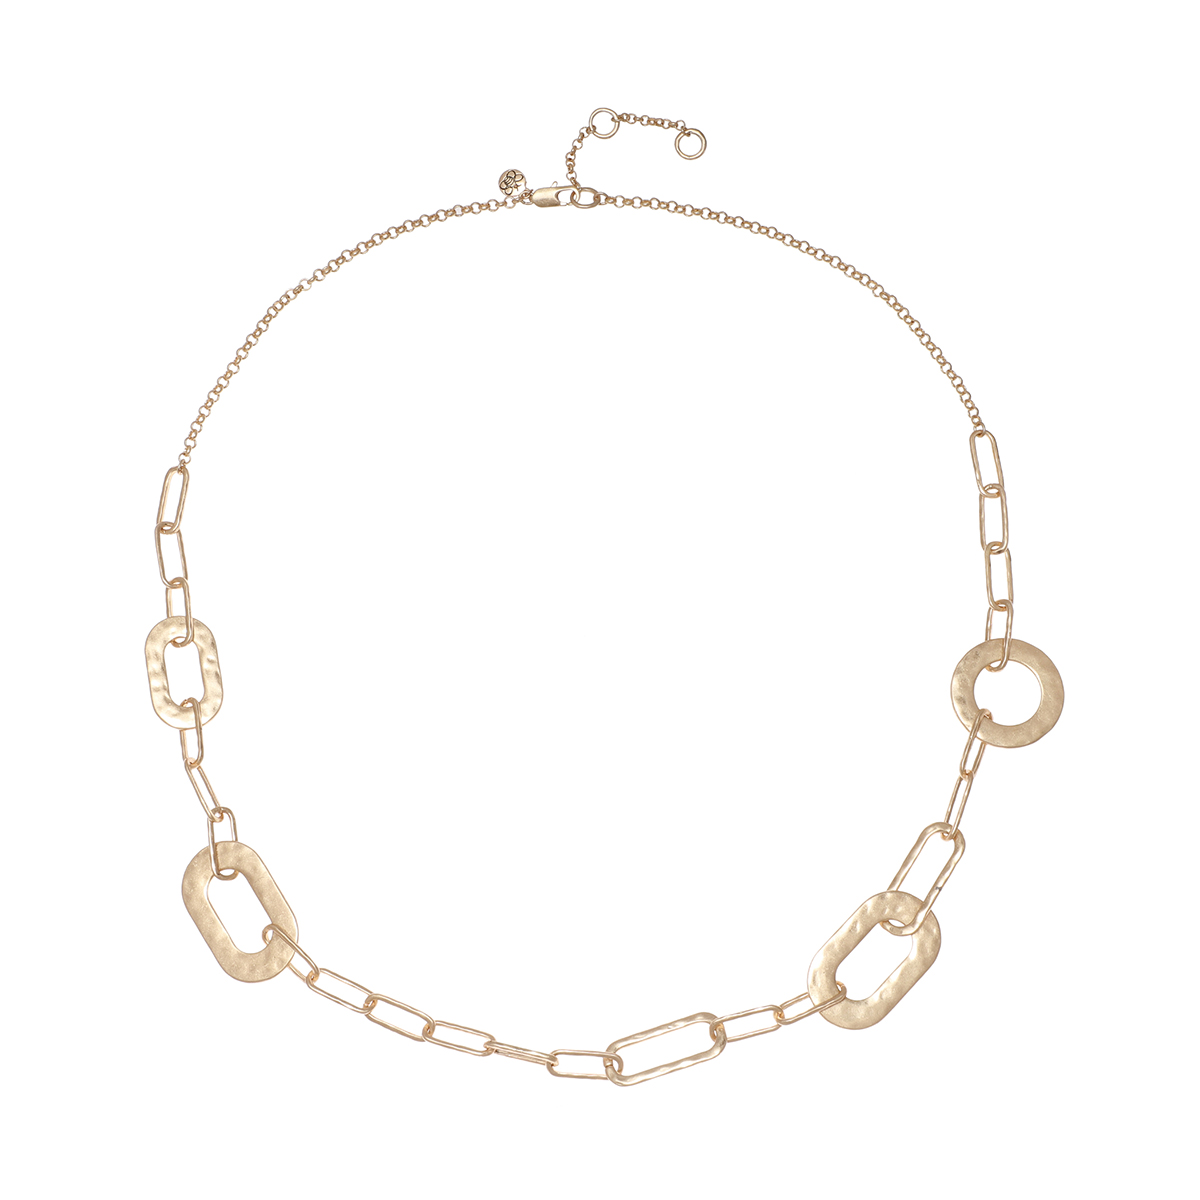 Bella Uno Worn Gold-Tone Ring Chain Long Necklace